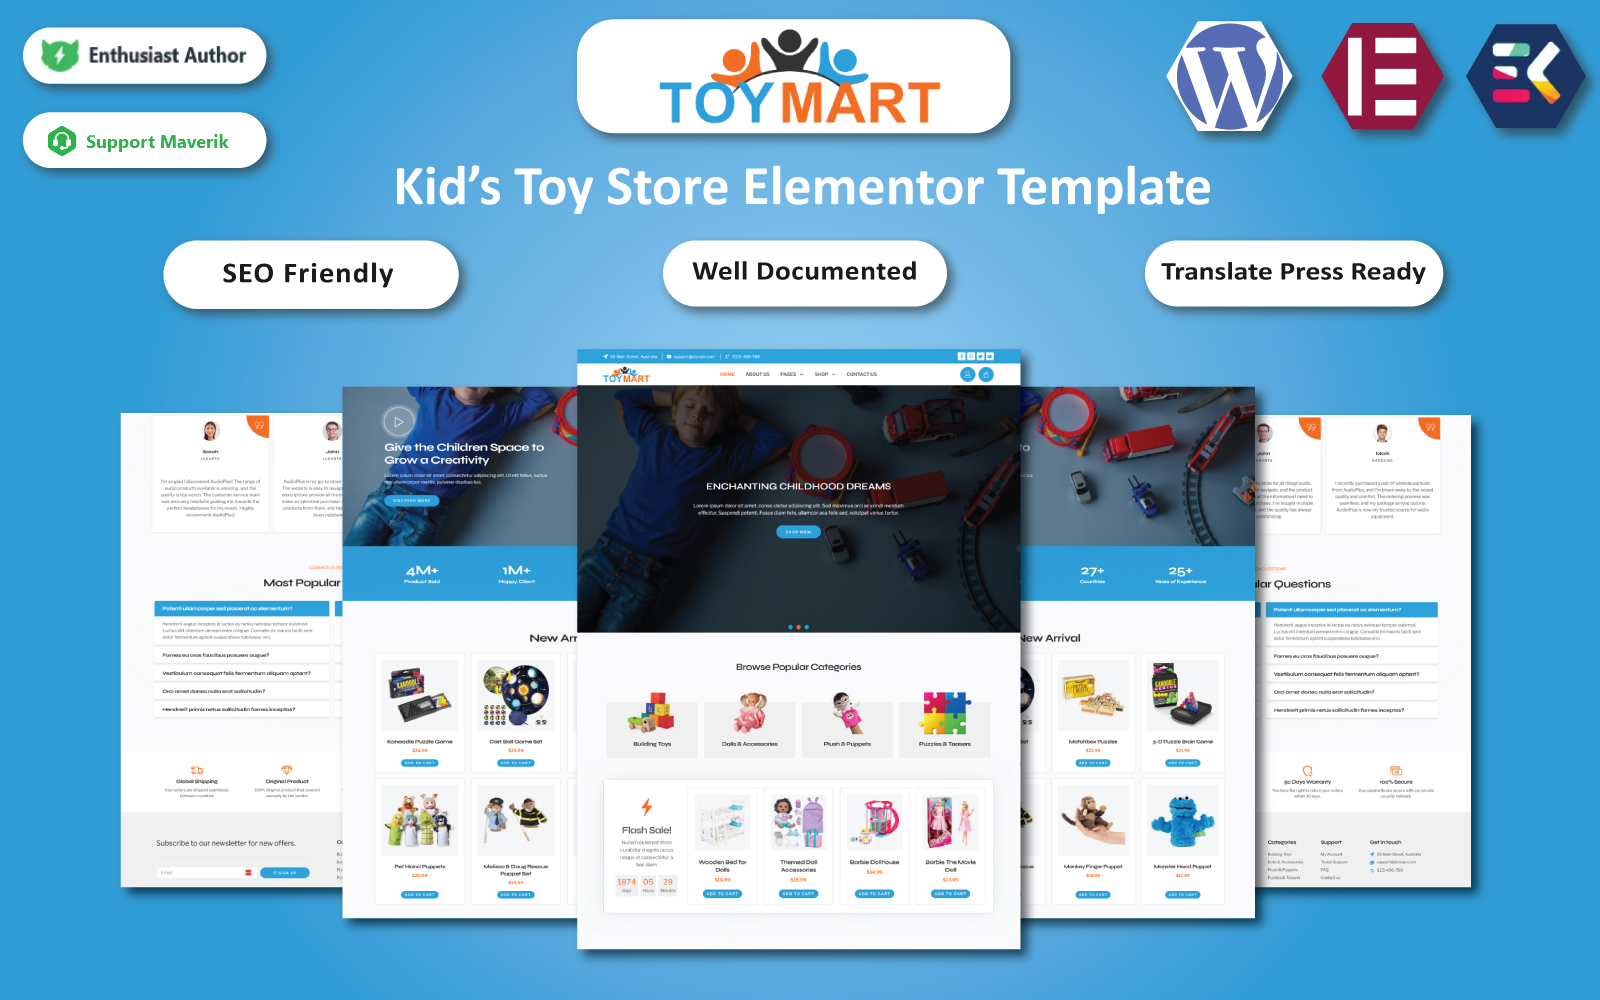 Toy Mart - Kid's Toy Store Elementor Template